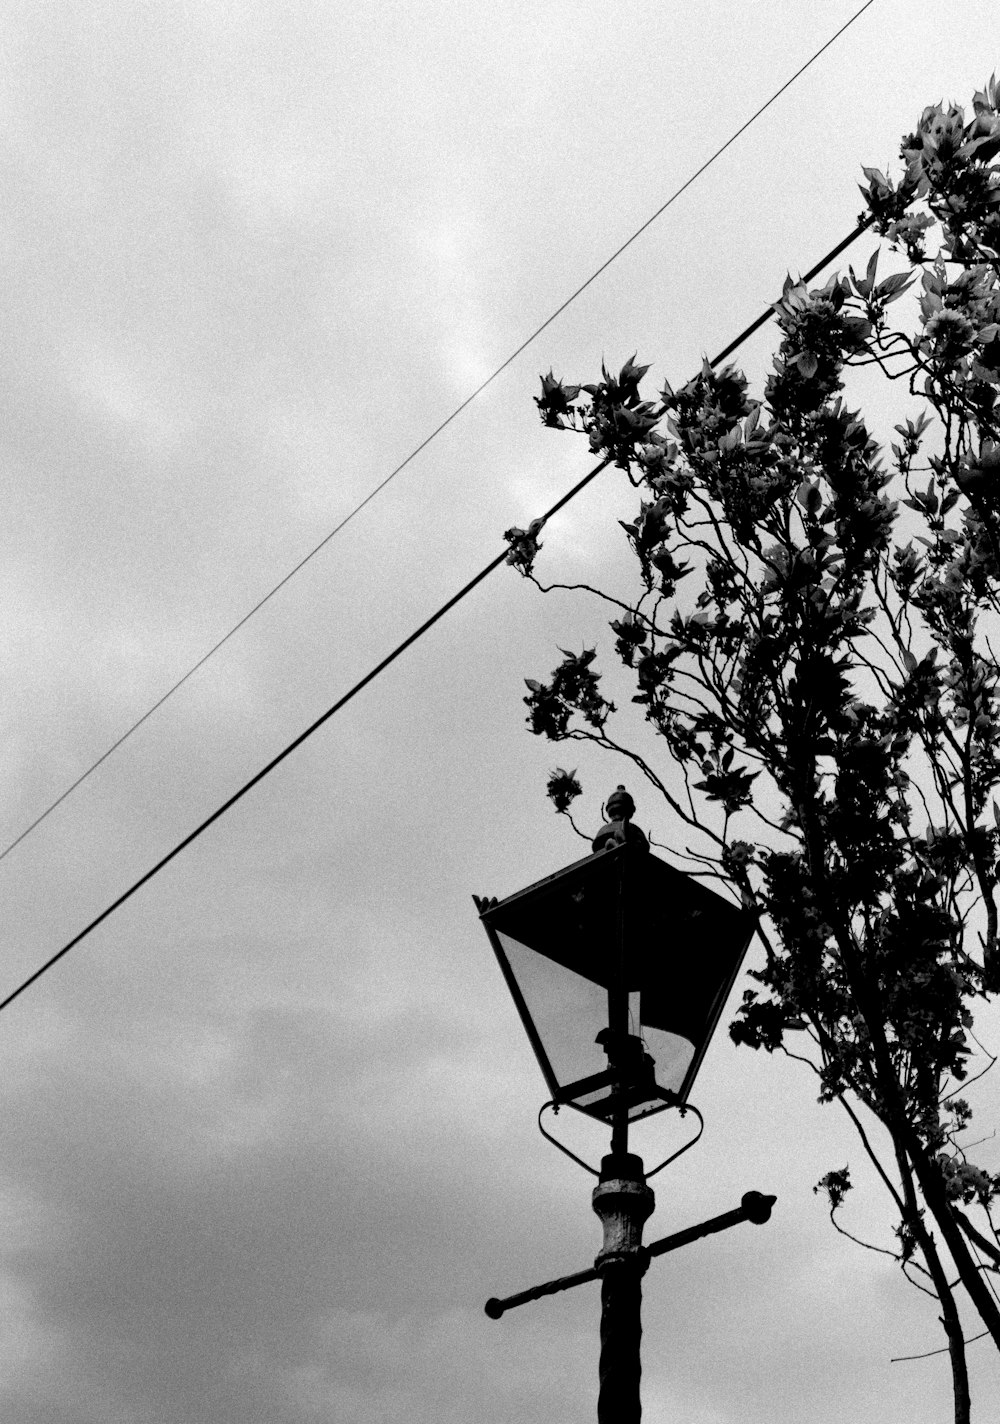 silhouette of bird on electric wire under cloudy sky during daytime